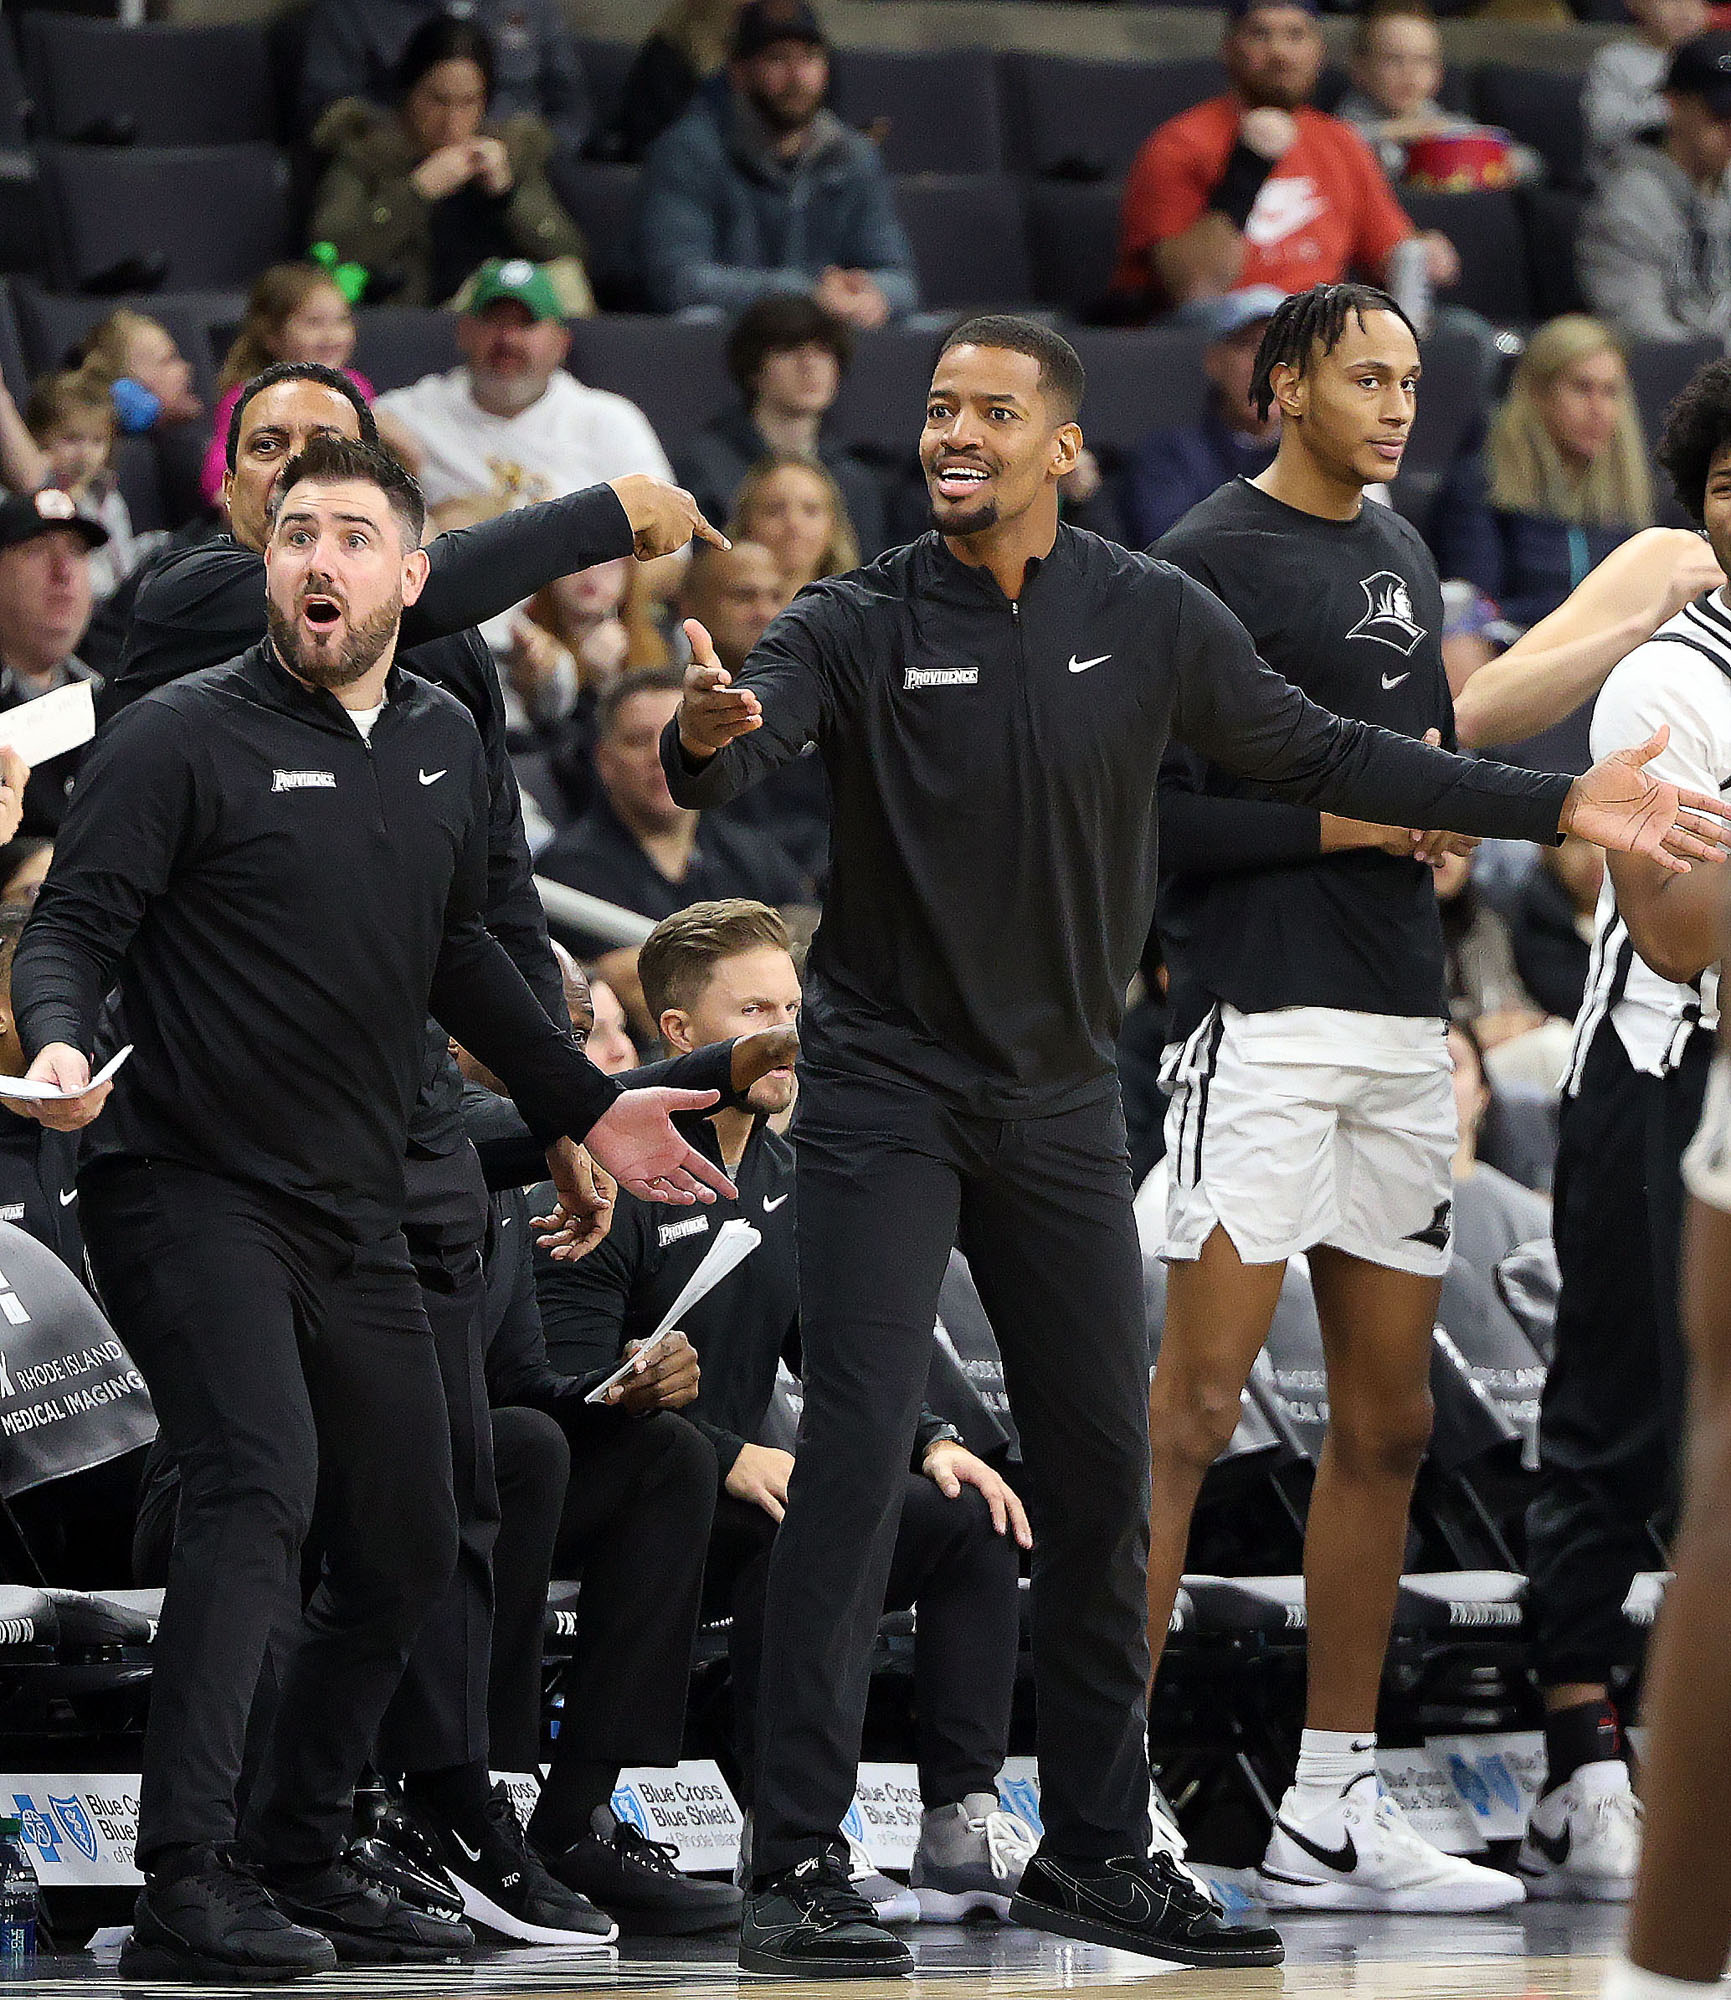 Friars throw everything at Butler, fall short in final seconds